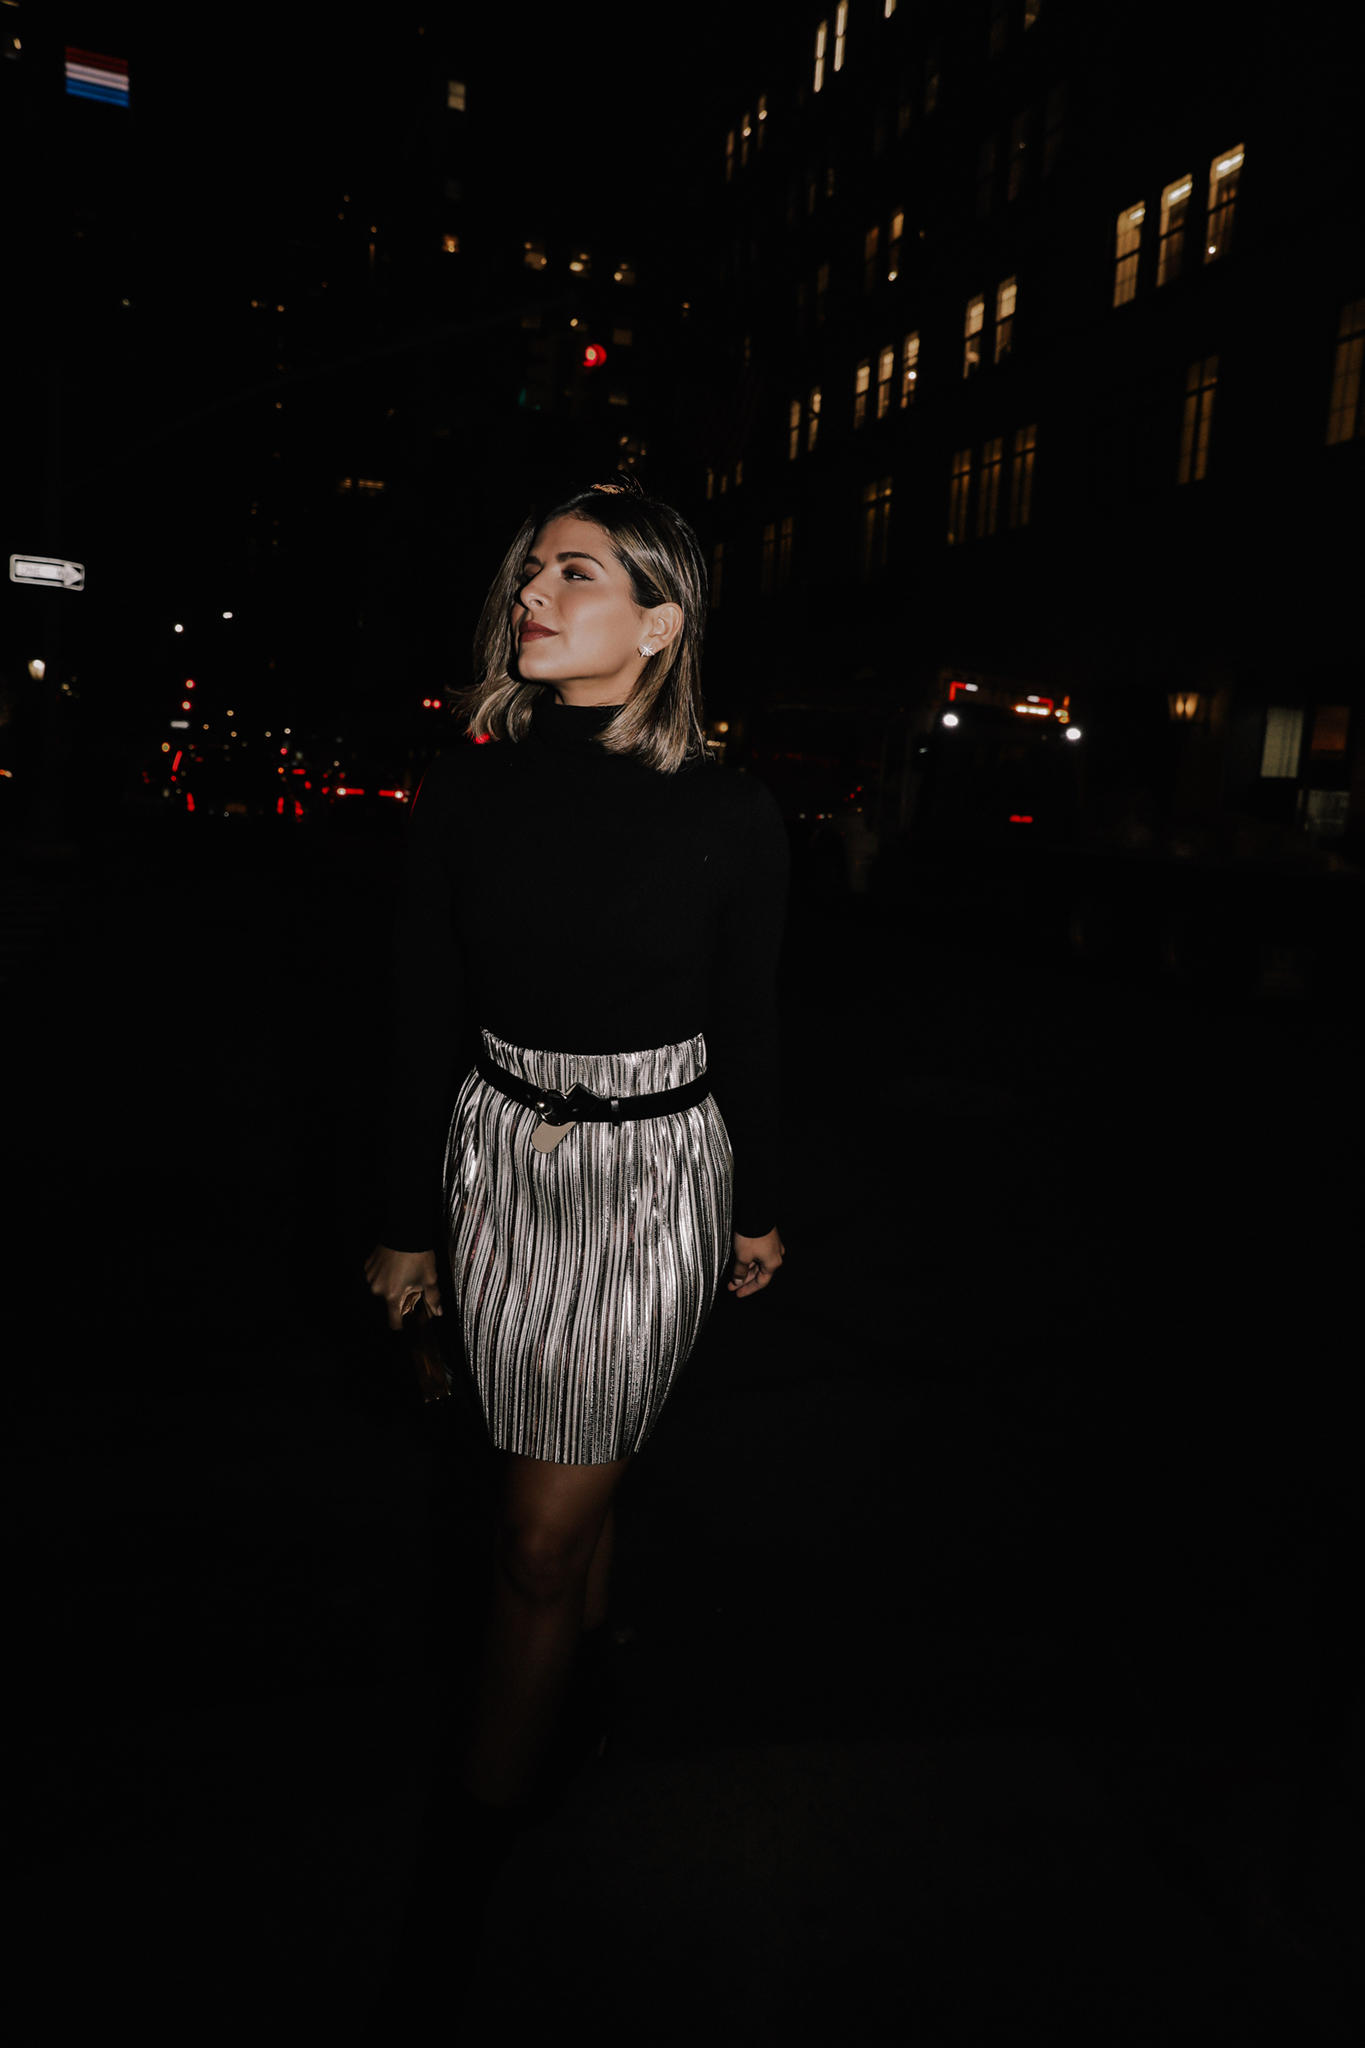 5 Festive Pieces to Wear to Your Next Holiday Party by Pam Hetlinger | TheGirlFromPanama.com | Metallic Skirt, holiday party outfit 2018, festive holiday party look, mini skirt and booties